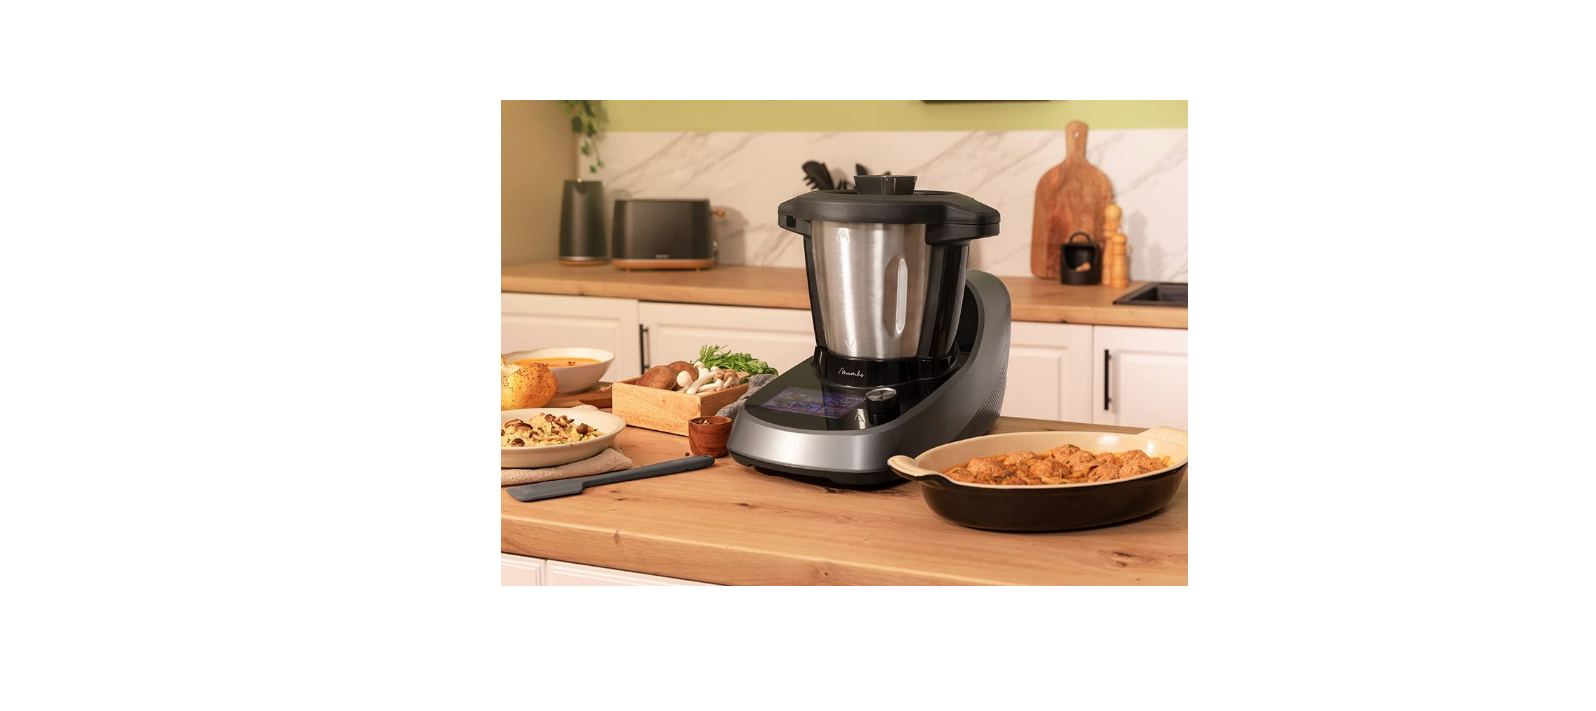 CCTC-04345 Mambo Touch Food Processor